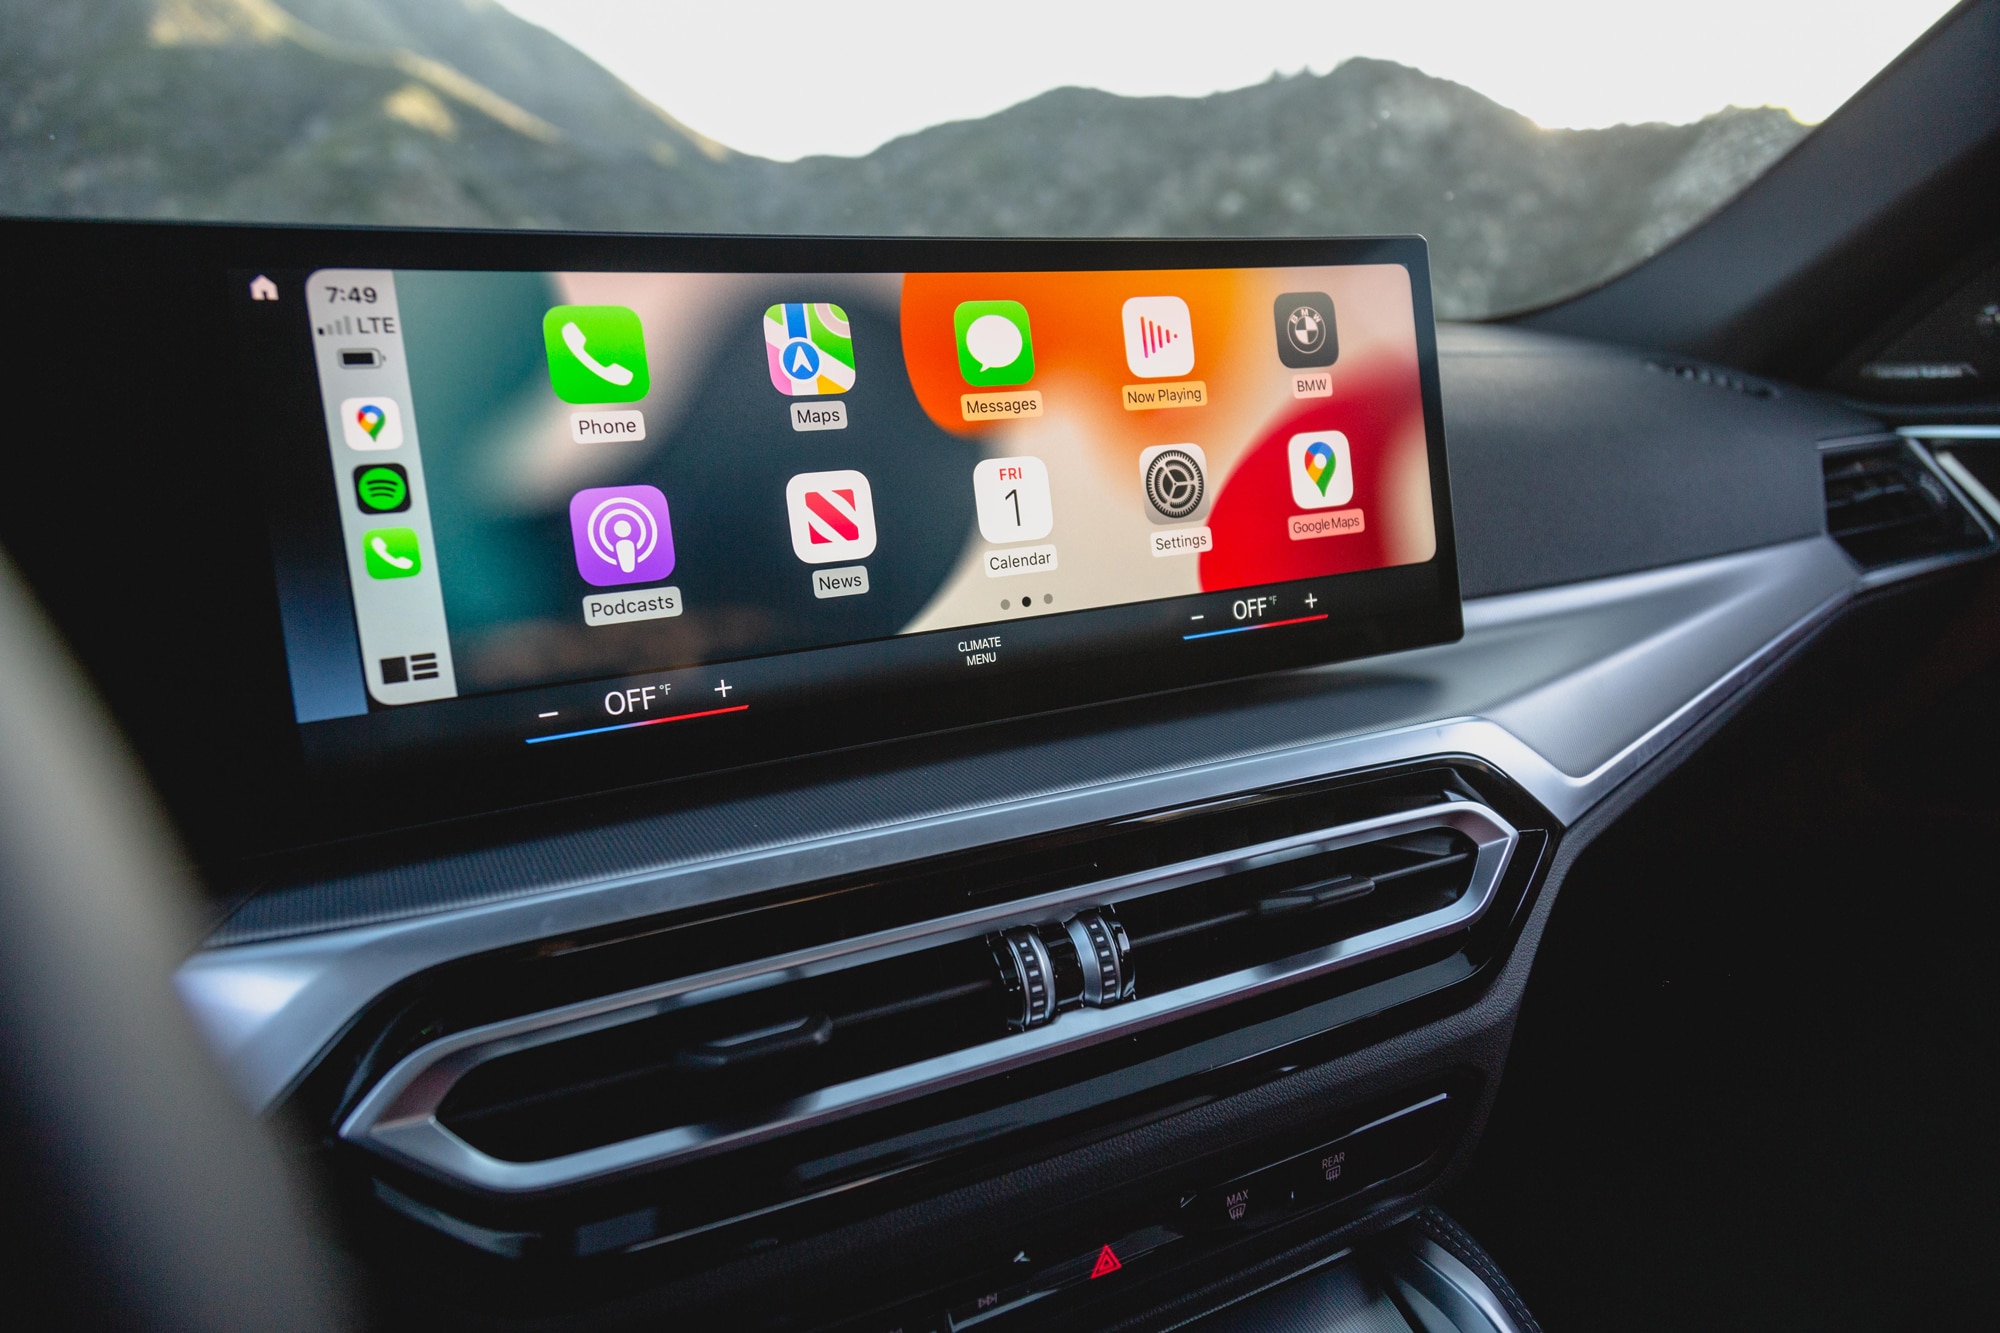 BMW i4 infotainment system showing Apple CarPlay with mountains in view